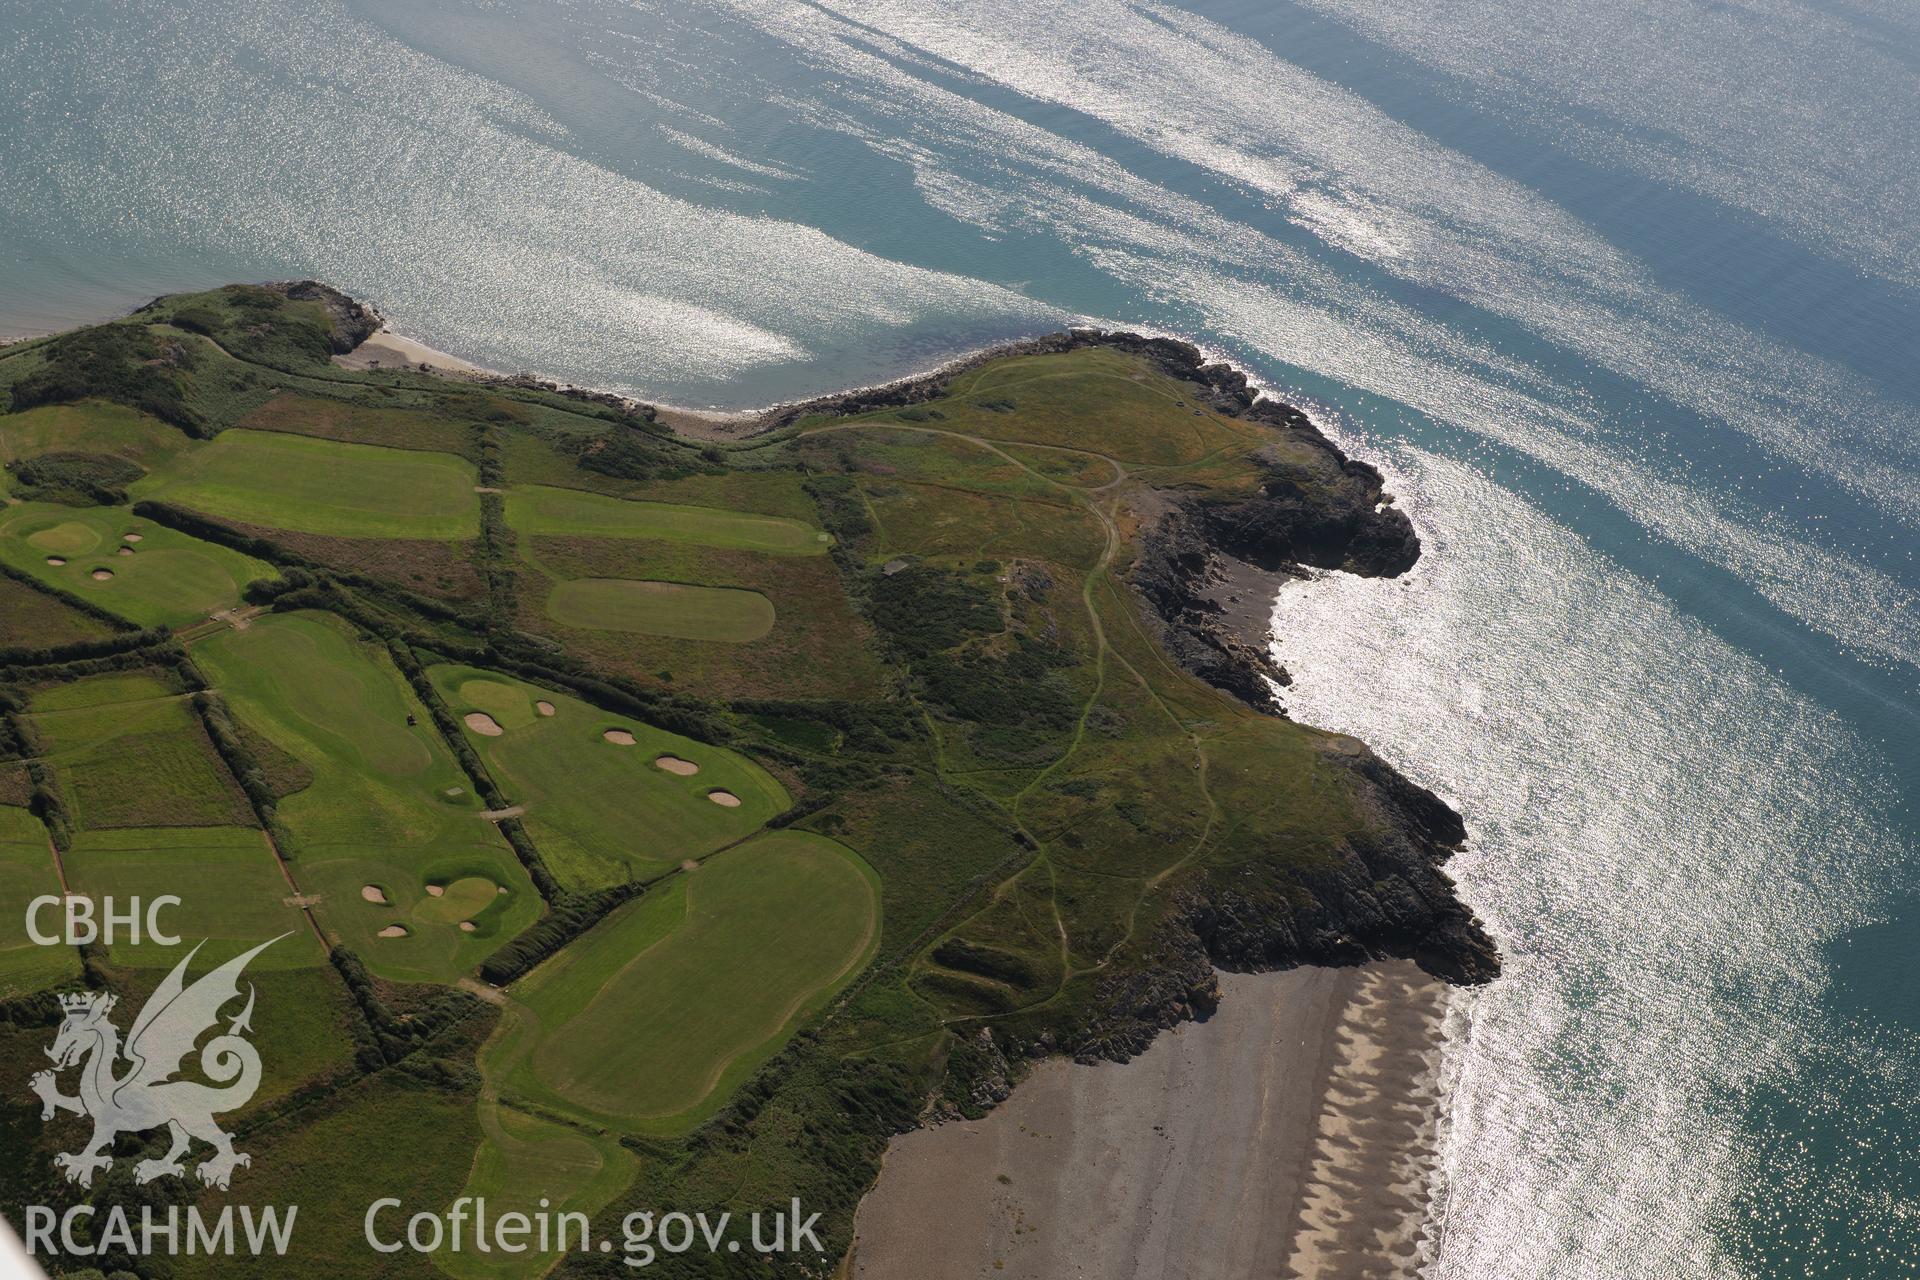 Flint find spot on the cliffs and a disused rifle range on Pen-ychain beach. Oblique aerial photograph taken during the Royal Commission's programme of archaeological aerial reconnaissance by Toby Driver on 23rd June 2015.